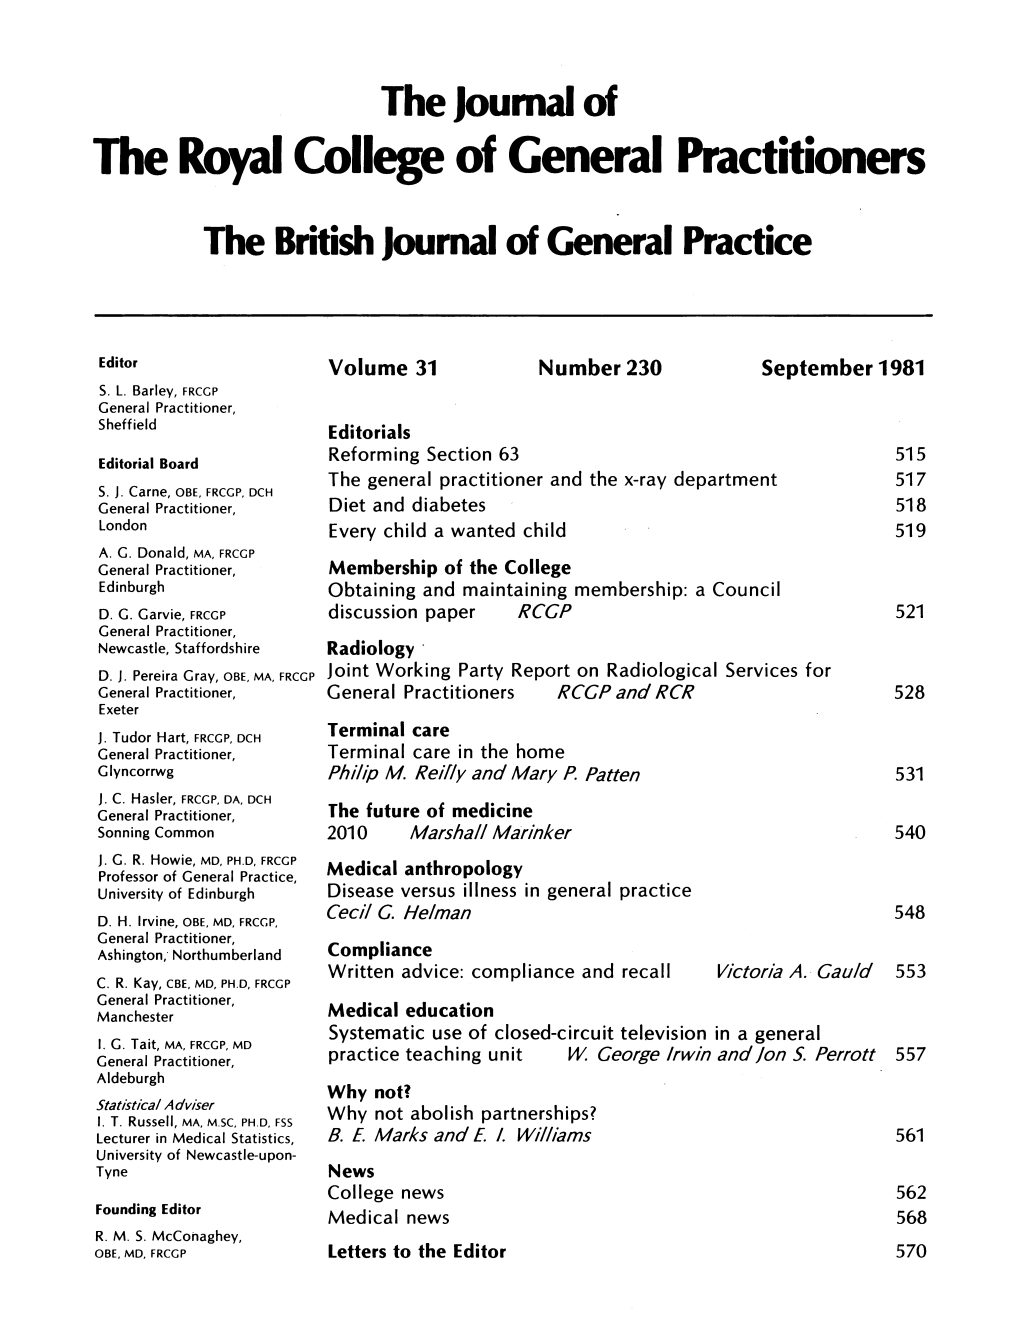 Theroyal College of General Practitioners the British Journal of General Practice